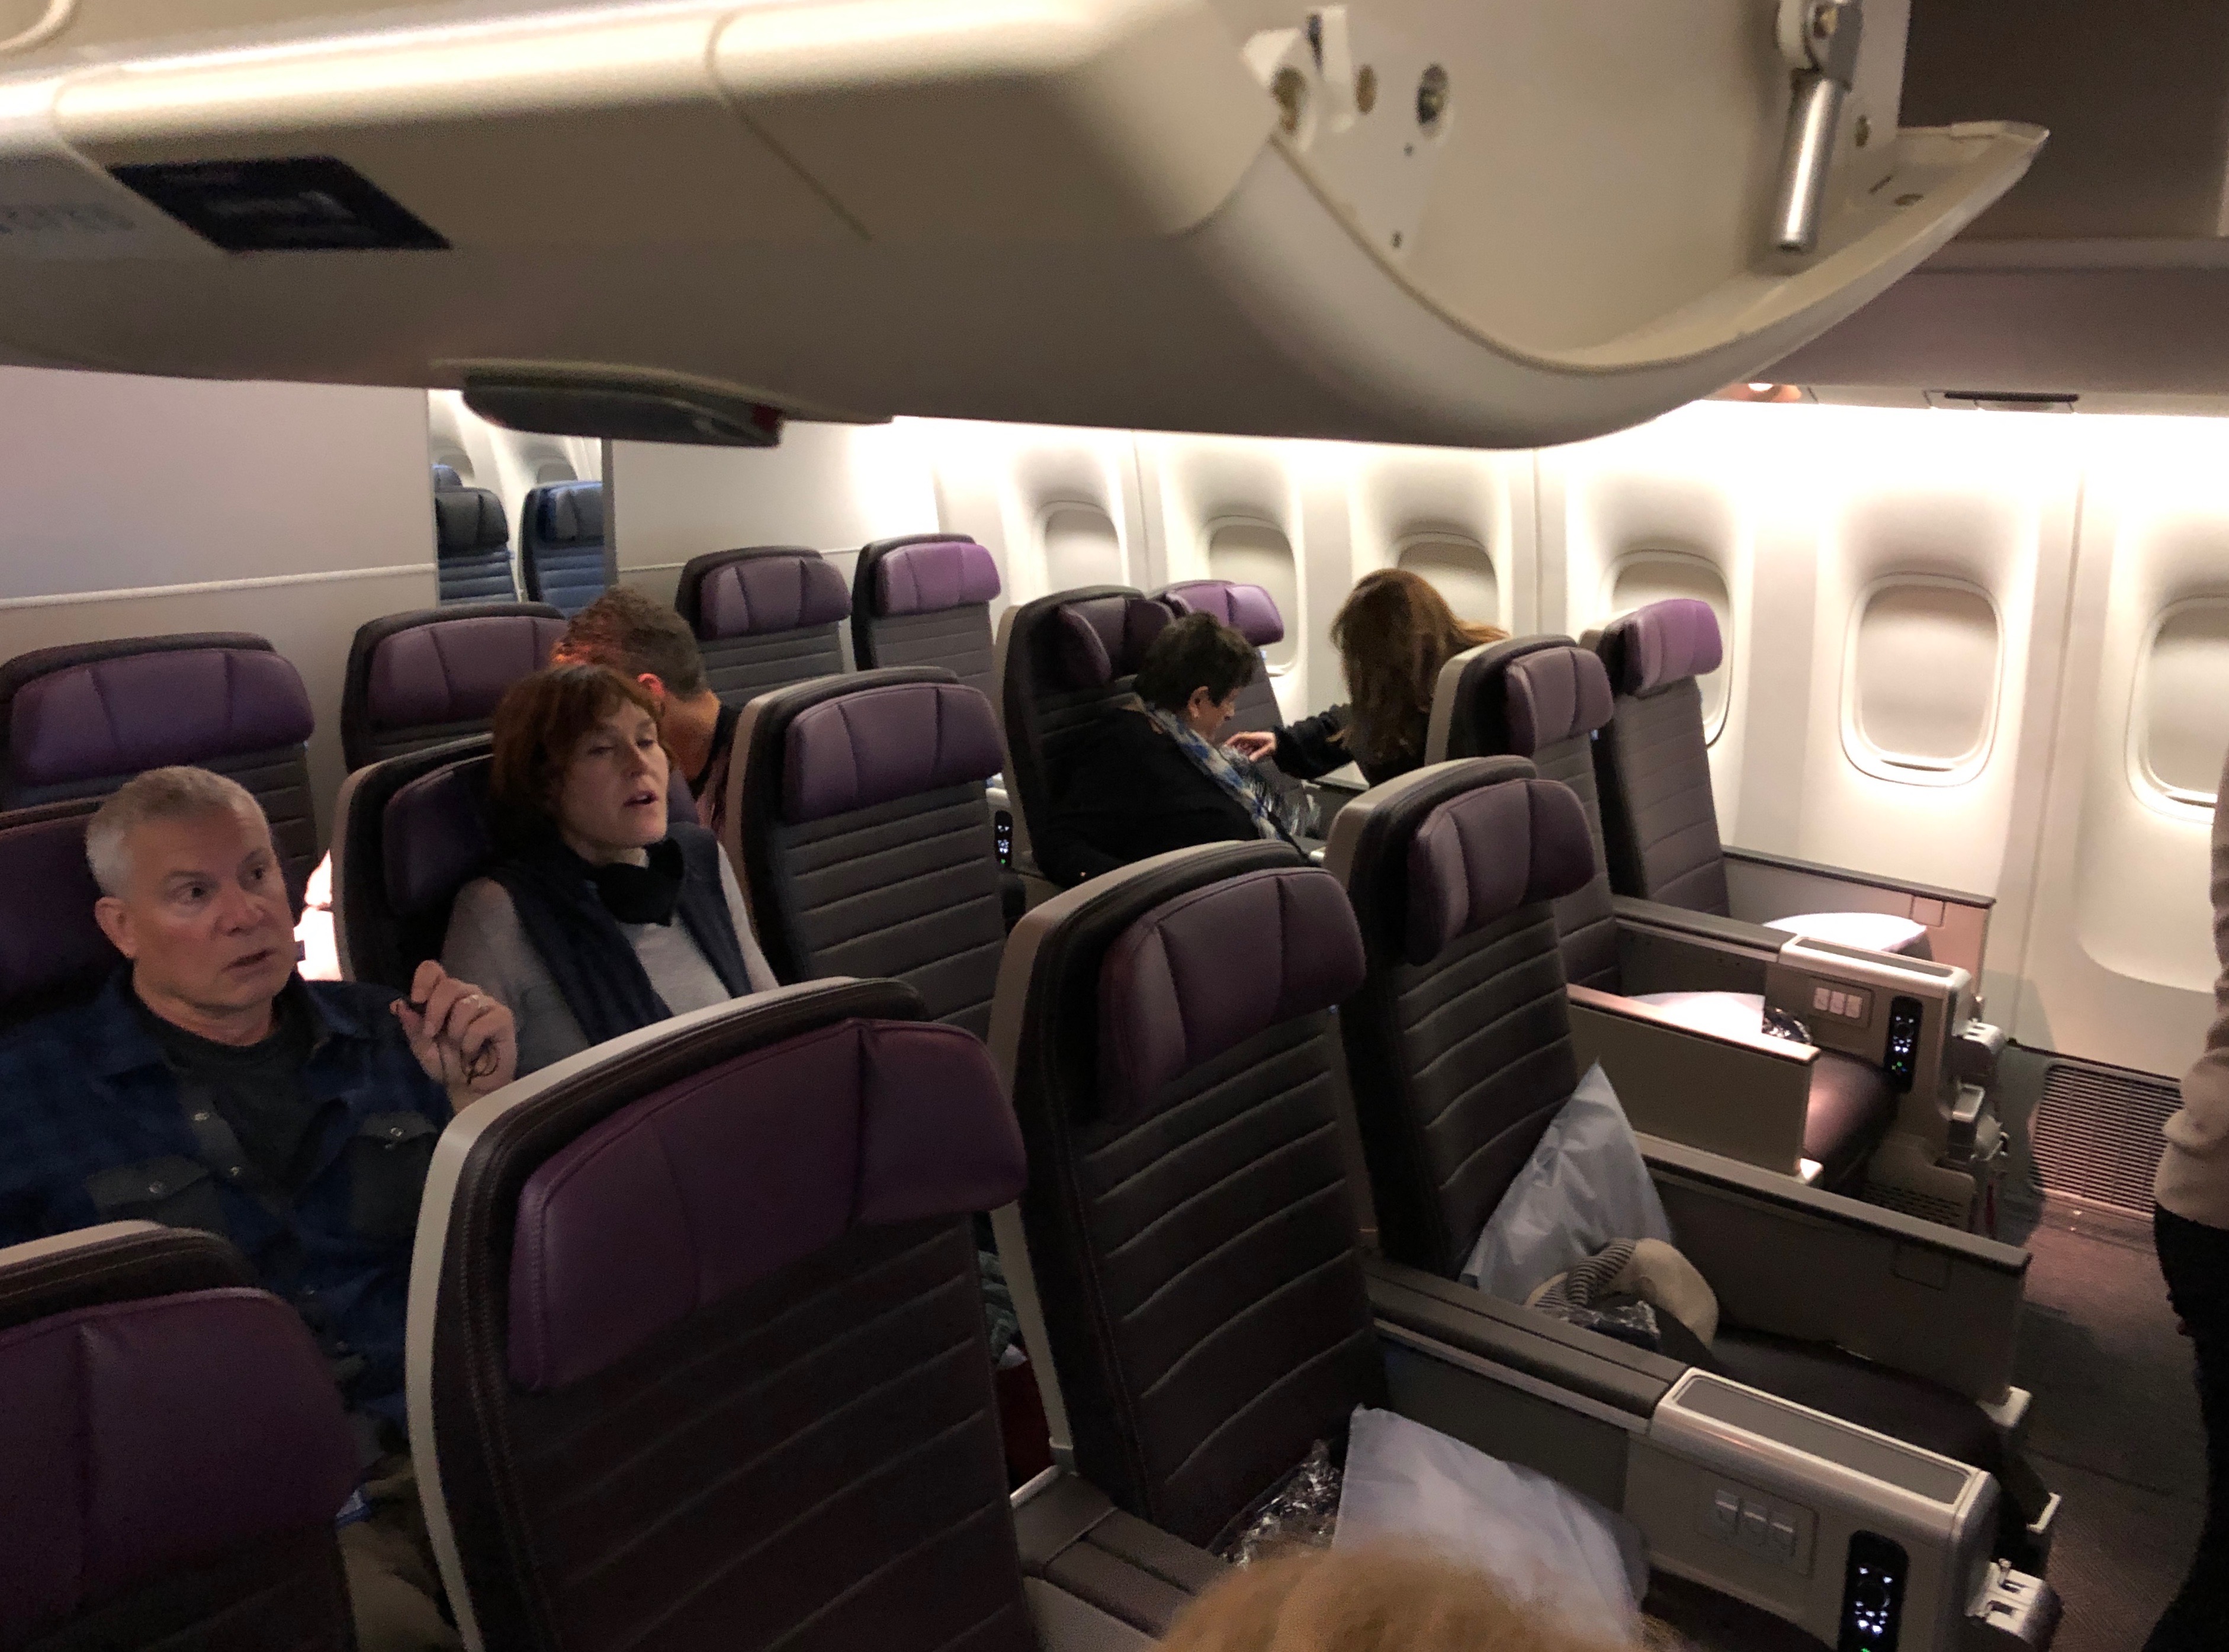 Review United S 777 Premium Plus Seat From Washington Dulles To Frankfurt Air Travel Analysis,How To Paint Bedroom Walls White